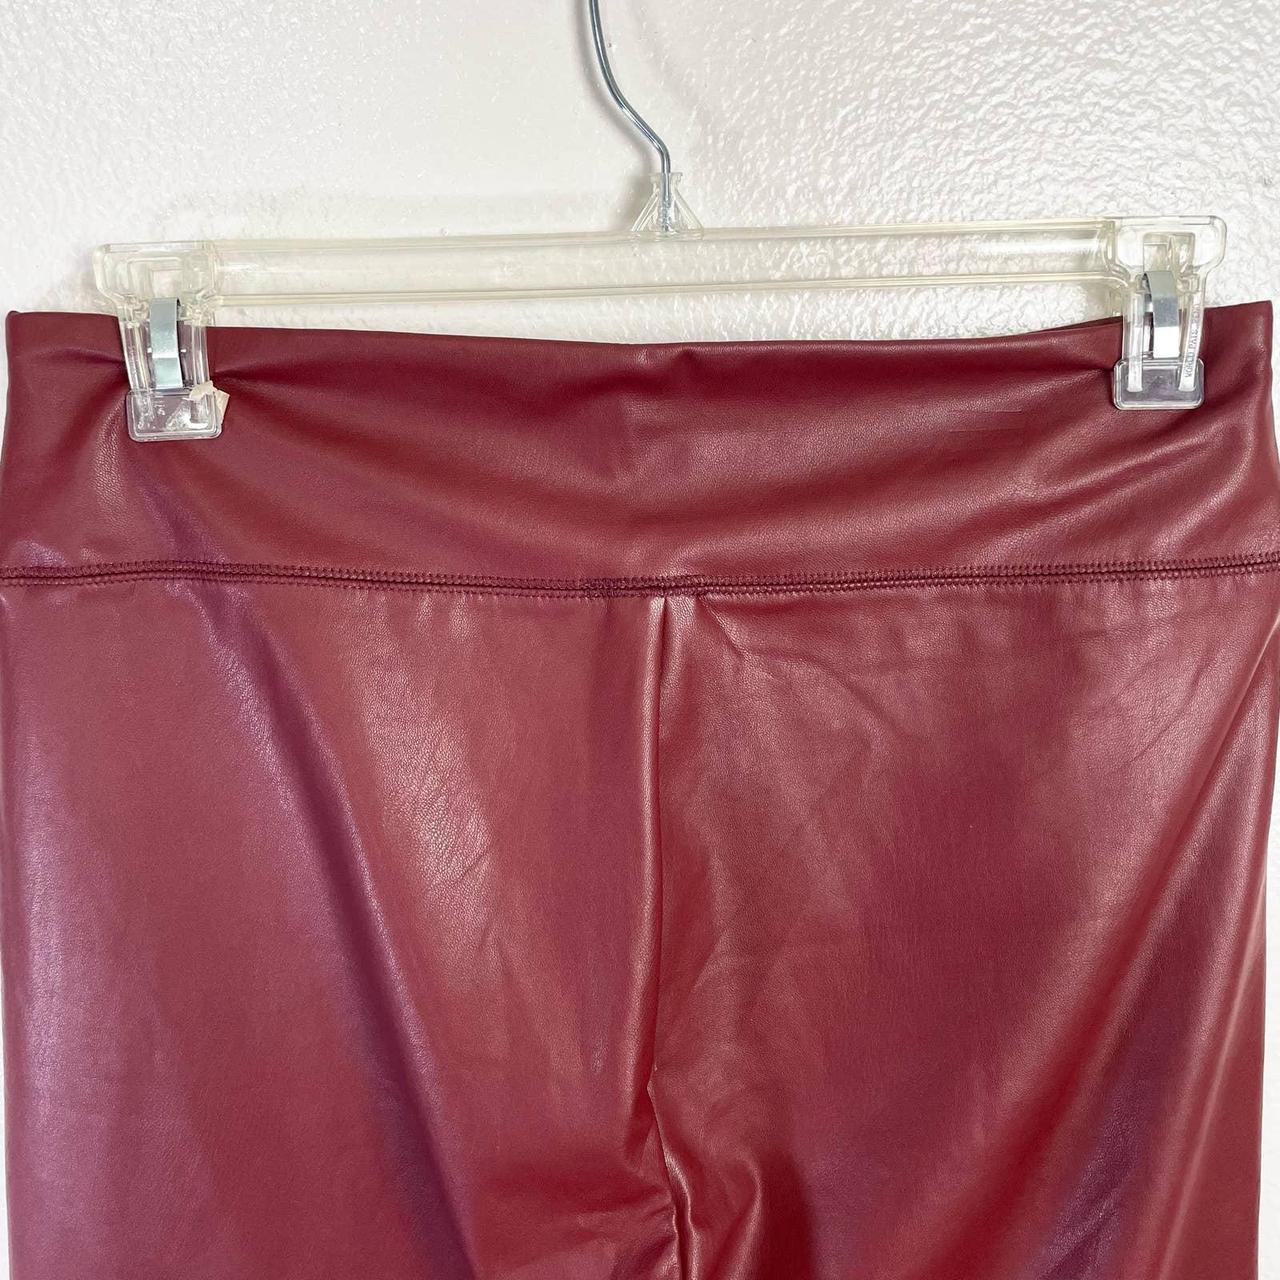 Wild Fable, High-Waisted Faux Leather Burgundy Leggings, US Women's L